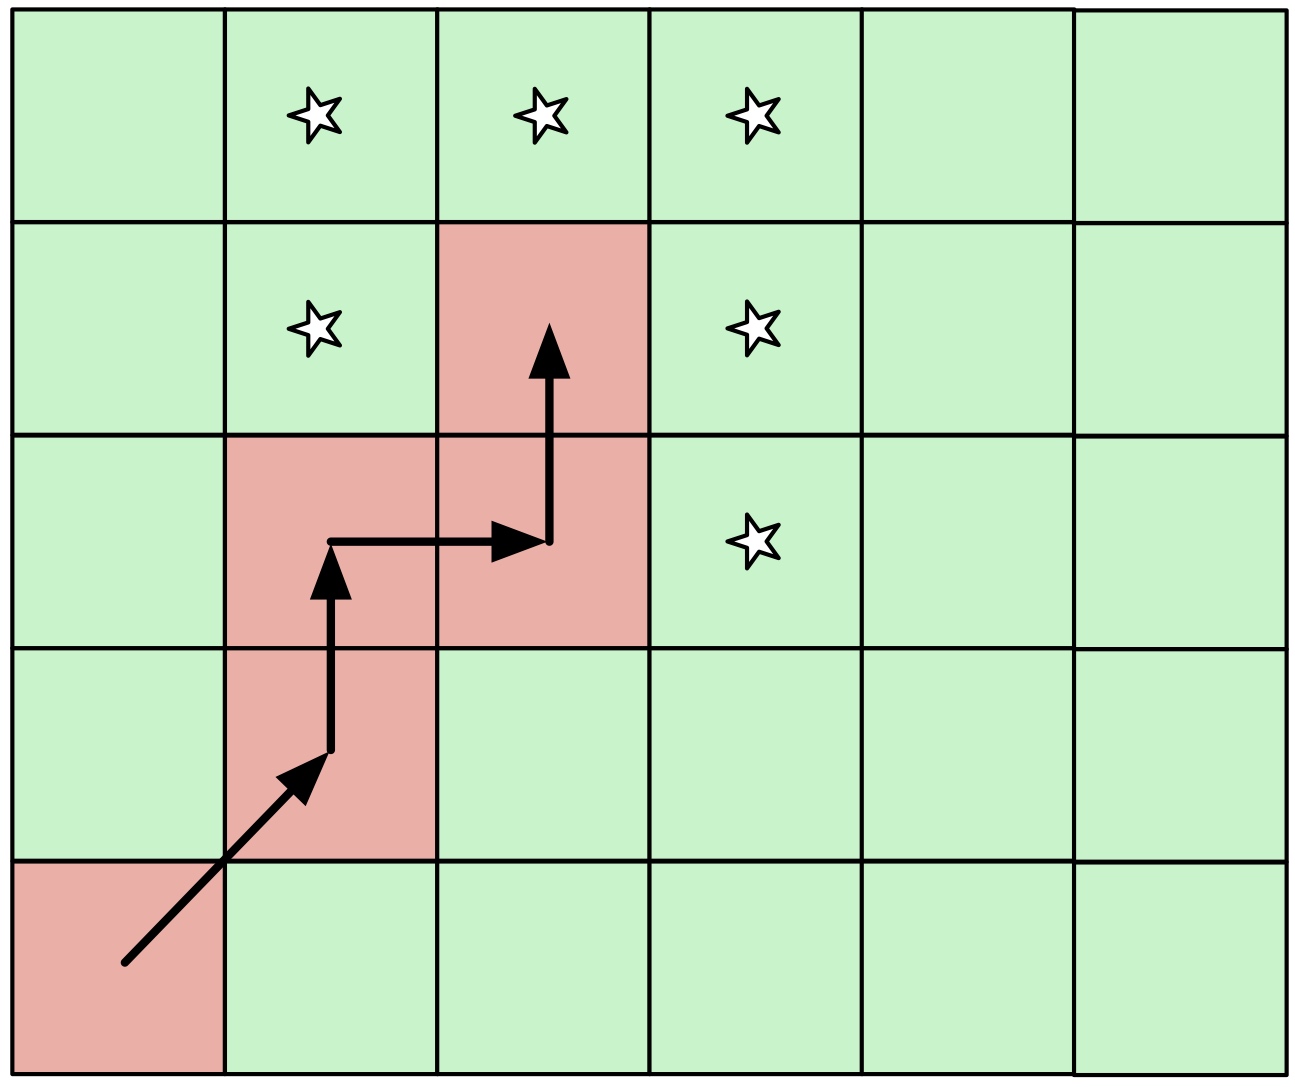 Simplified random route of a grazing animal.